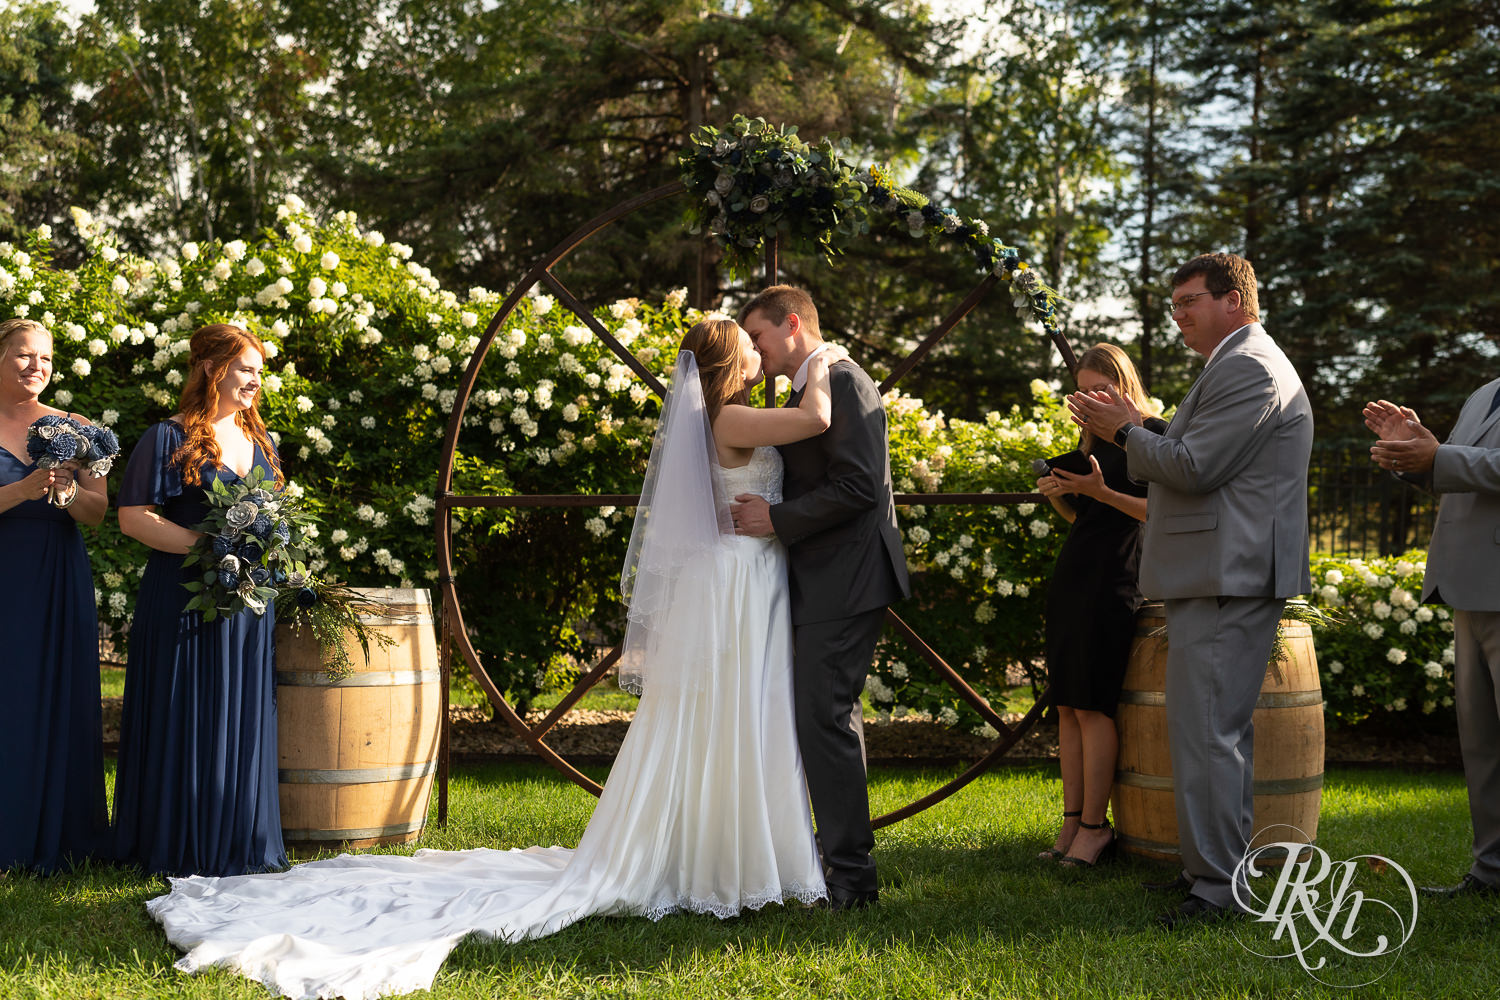 Outdoor wedding ceremony at Stone Lion Winery and Events in Isanti, Minnesota. 